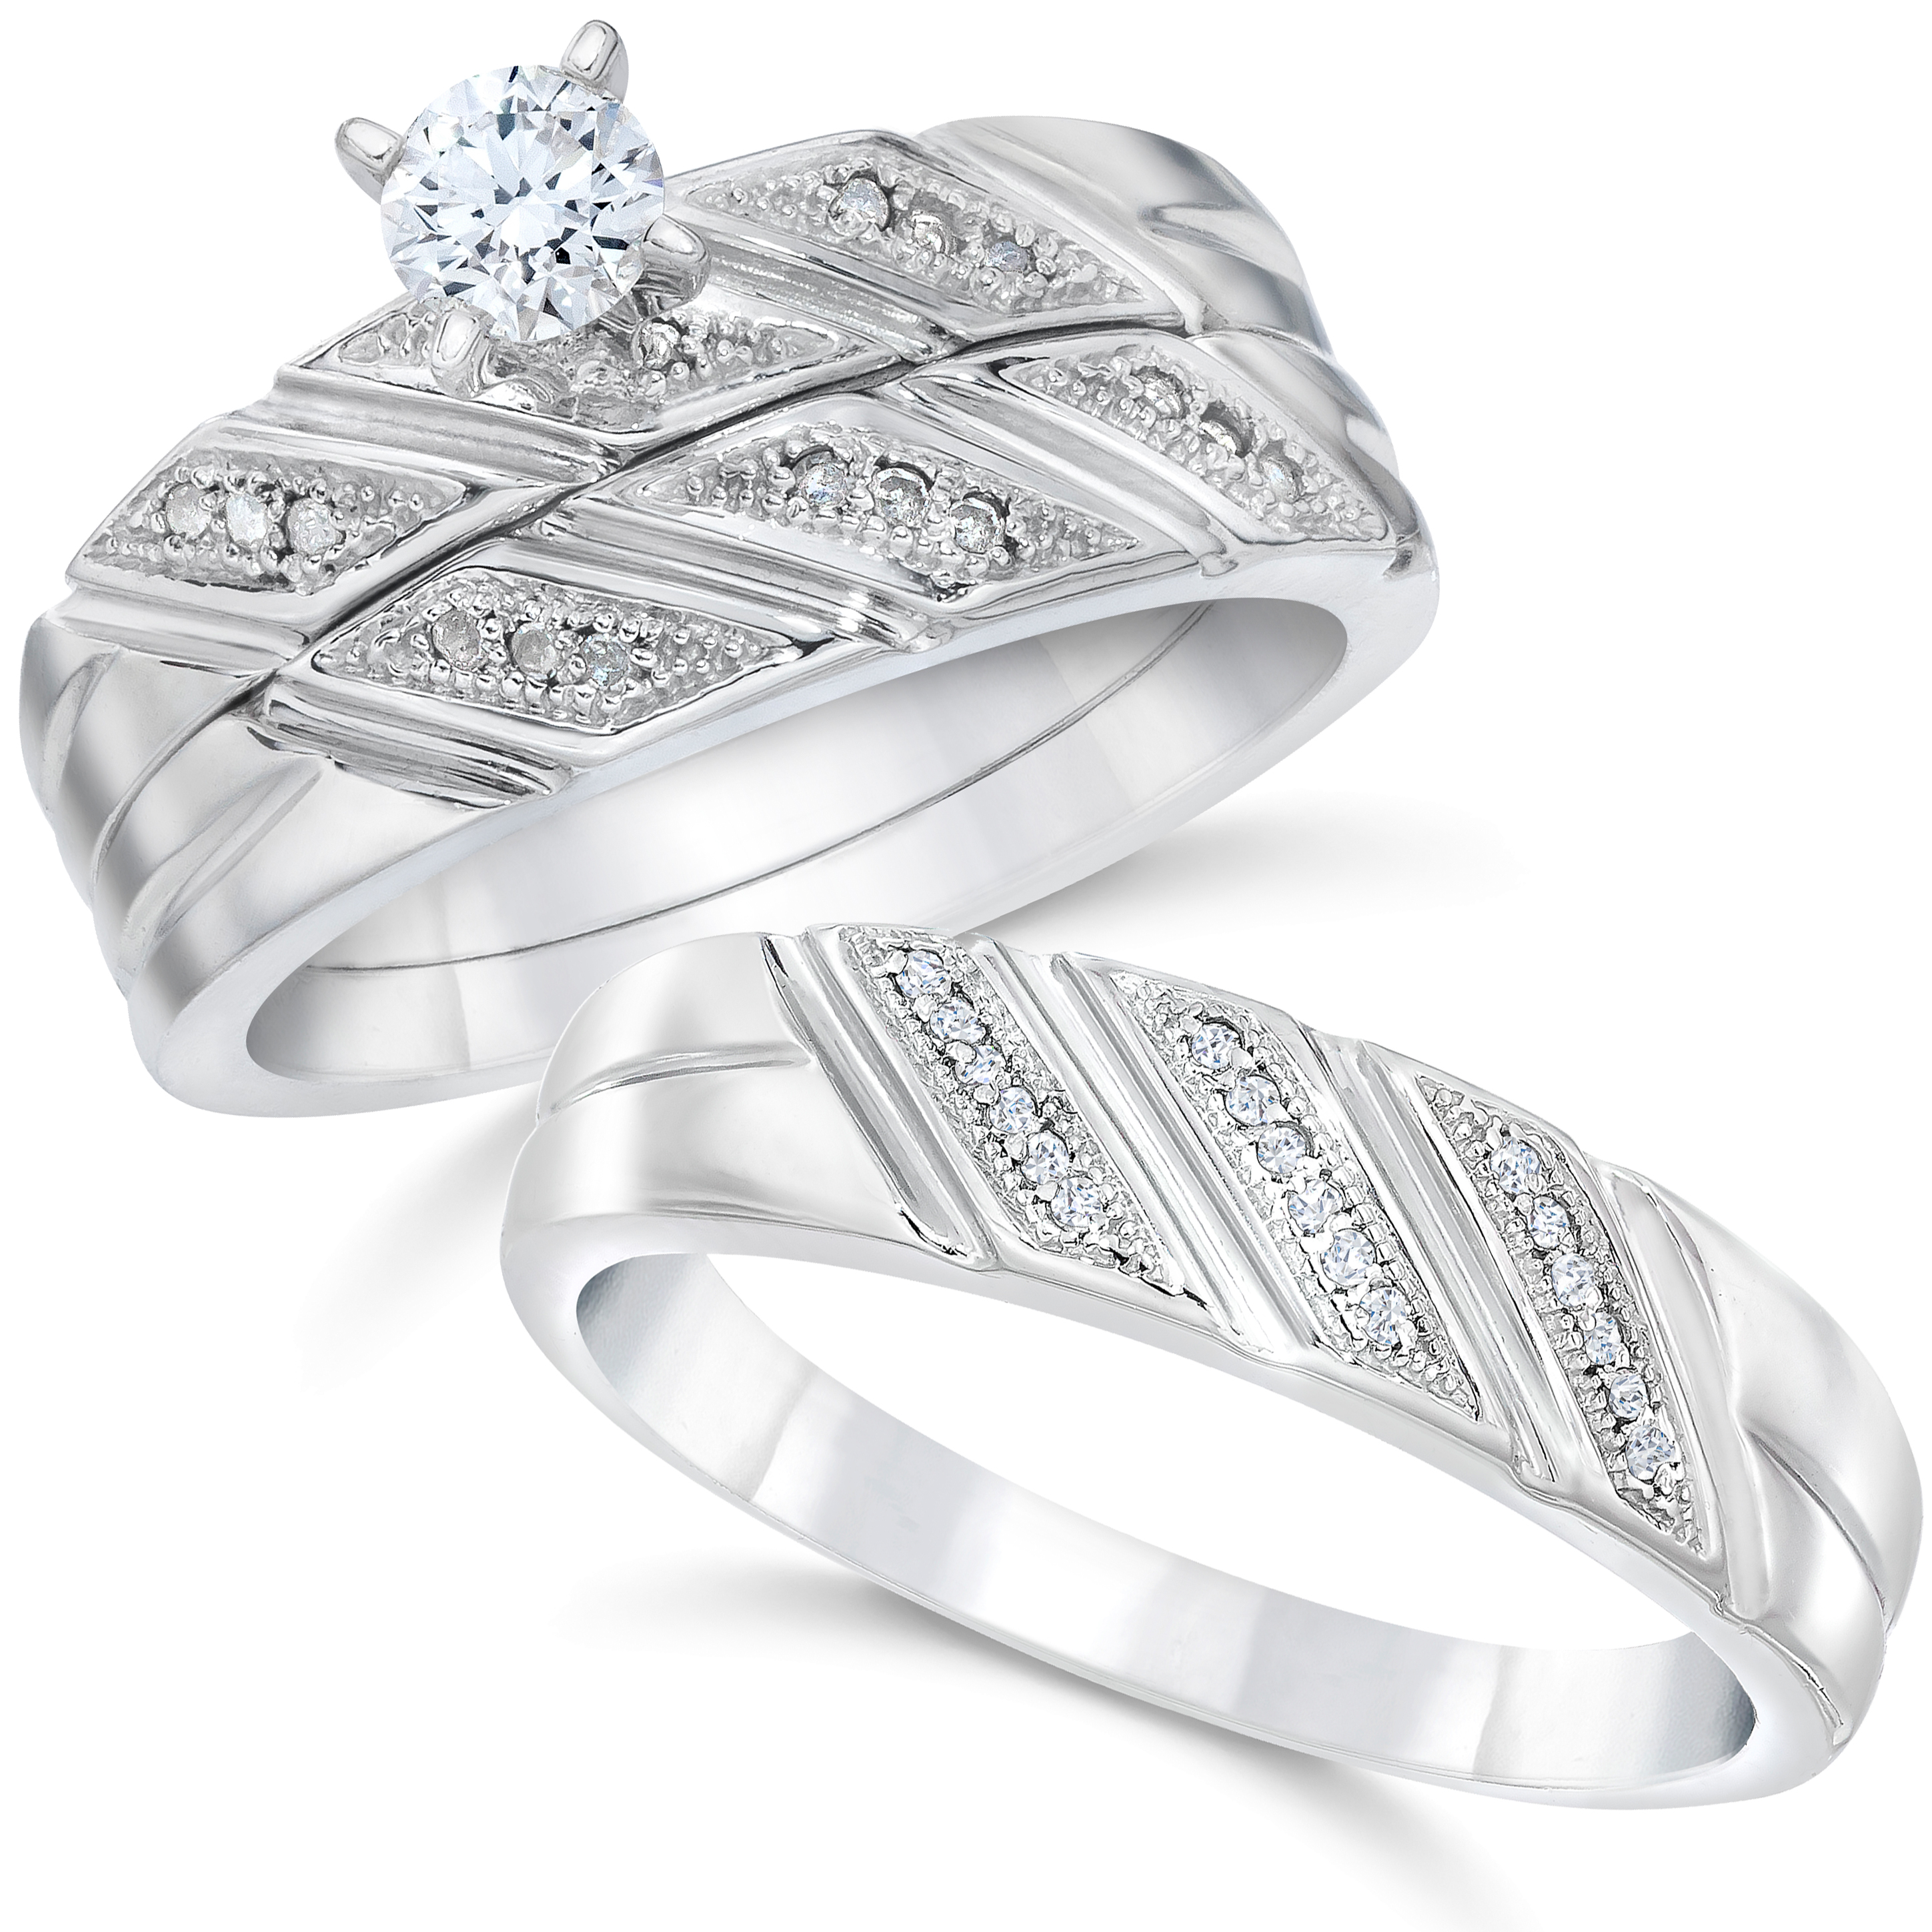 Diamond 14K White Gold Over Trio His And Her Bridal Wedding Engagement Ring Set 